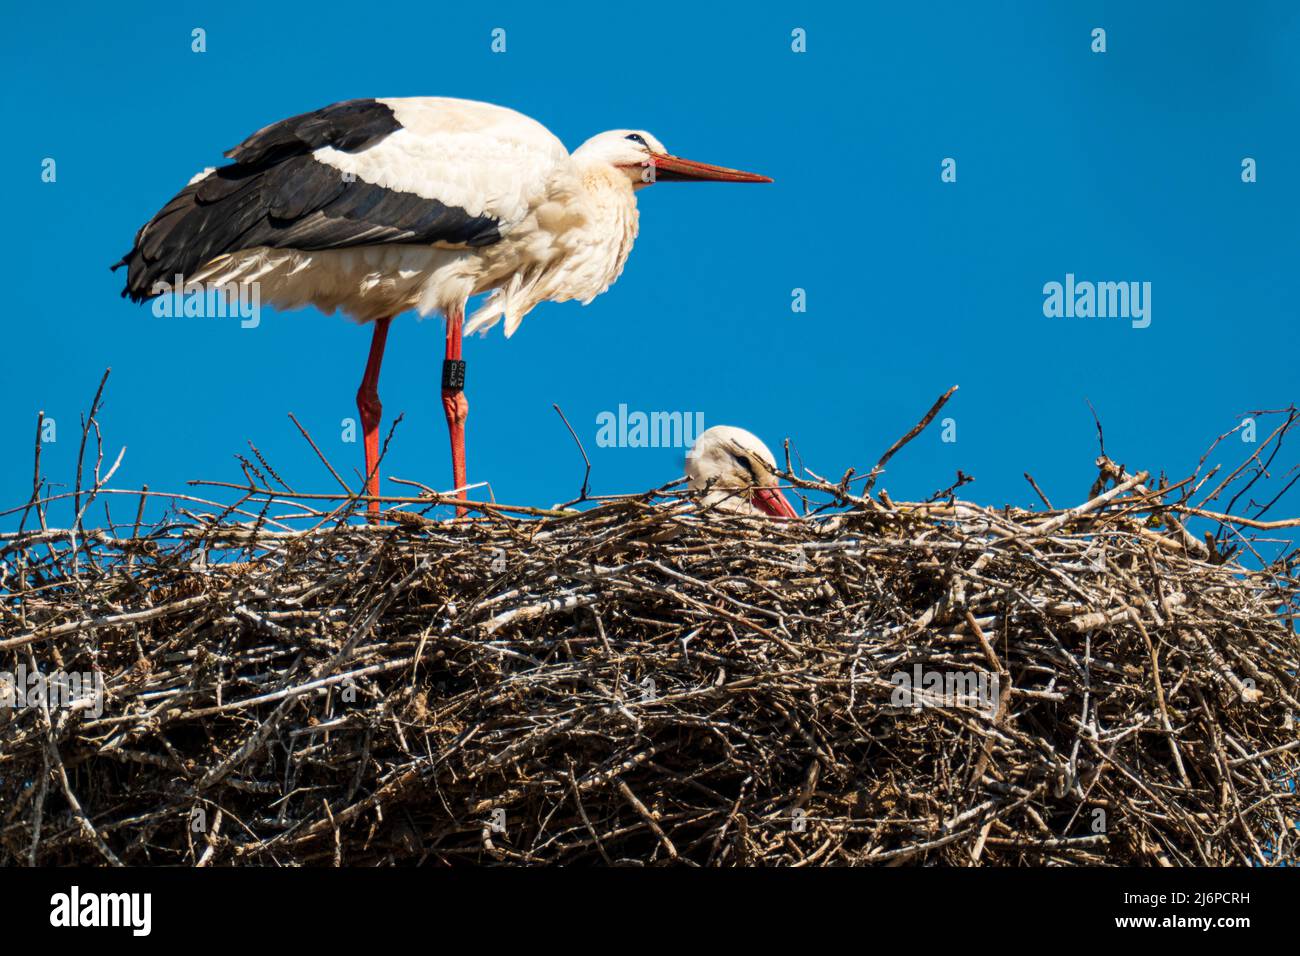 A stork stands into its nest in front of a blue, cloudless sky Stock Photo